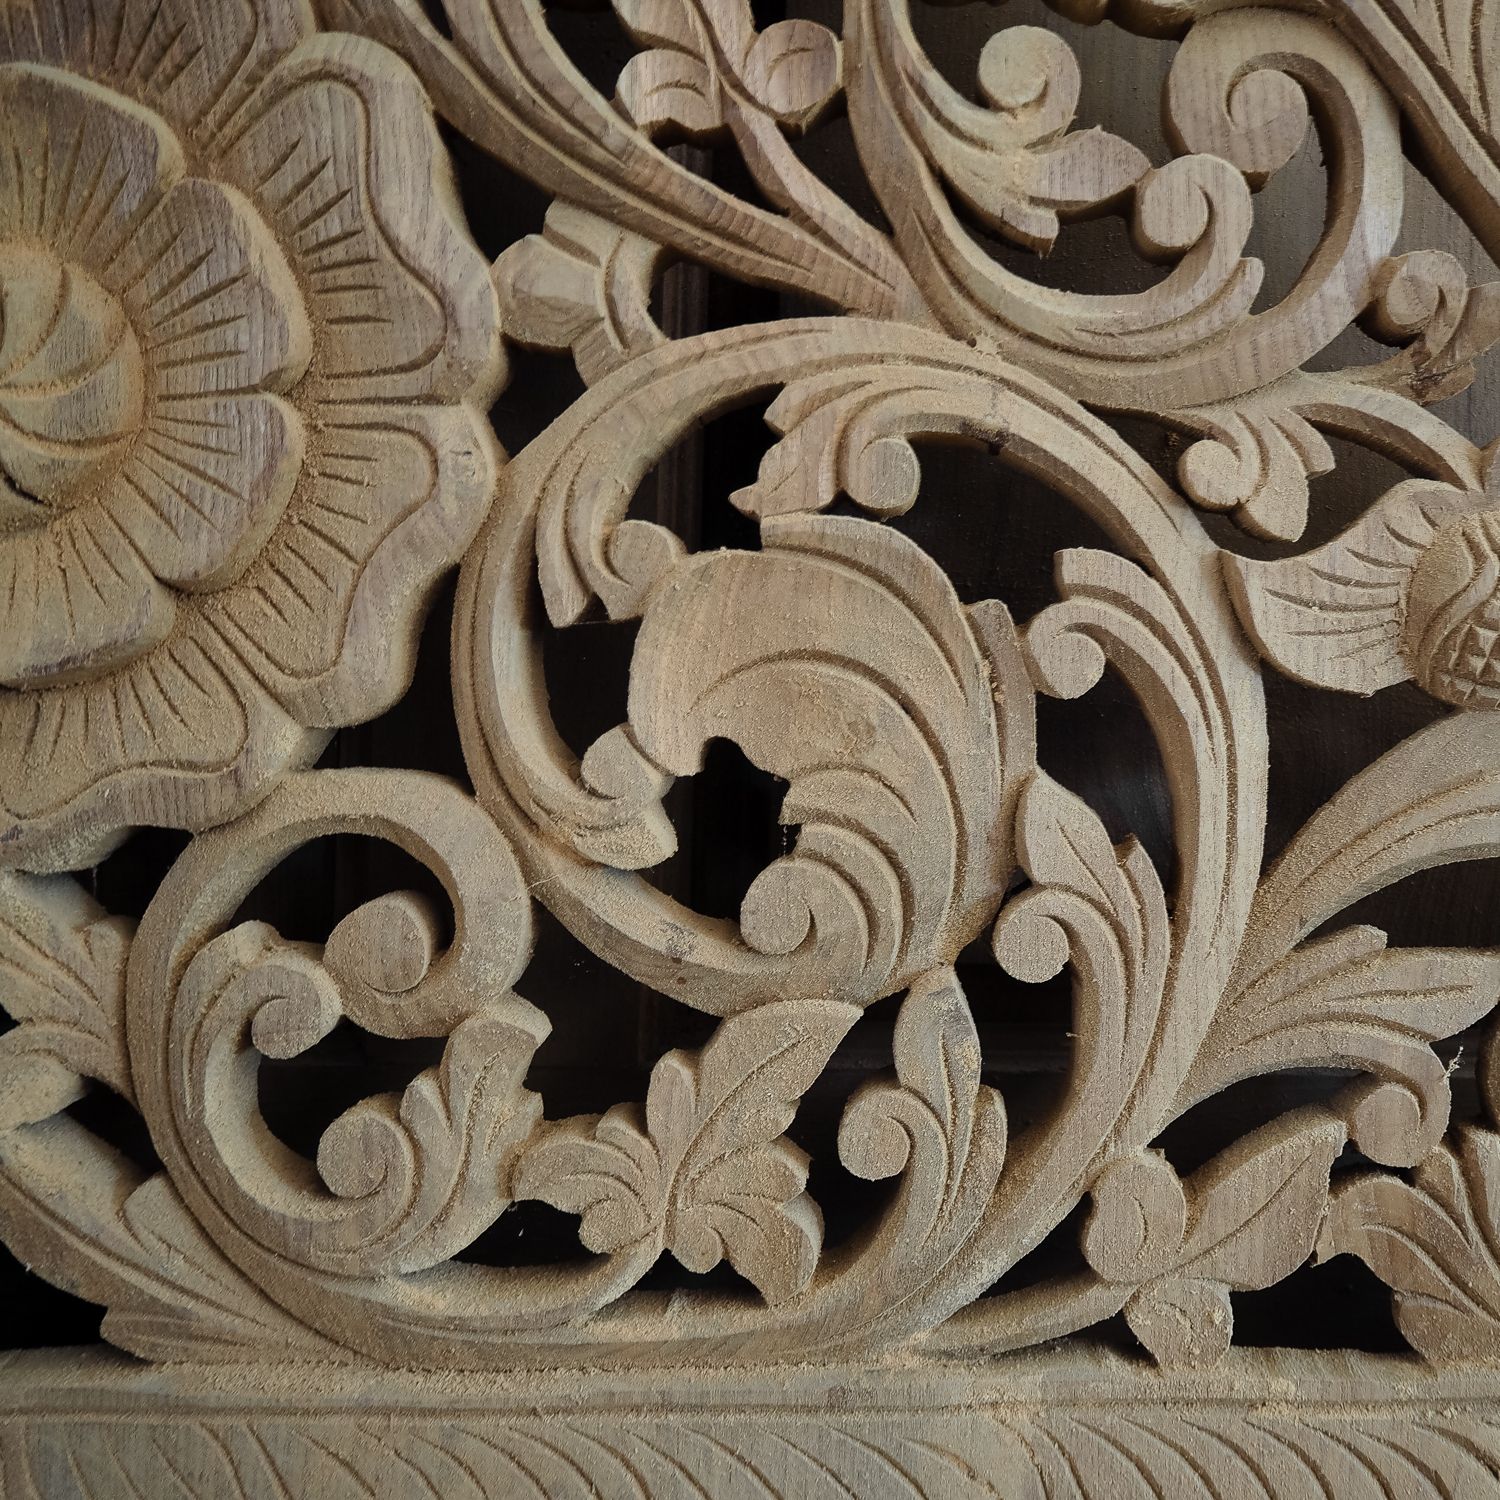 Most Recently Released Landscape Wood Wall Art Within Buy Carved Bed Panel Oriental Wall Art Decor, Carved Wood (View 8 of 20)